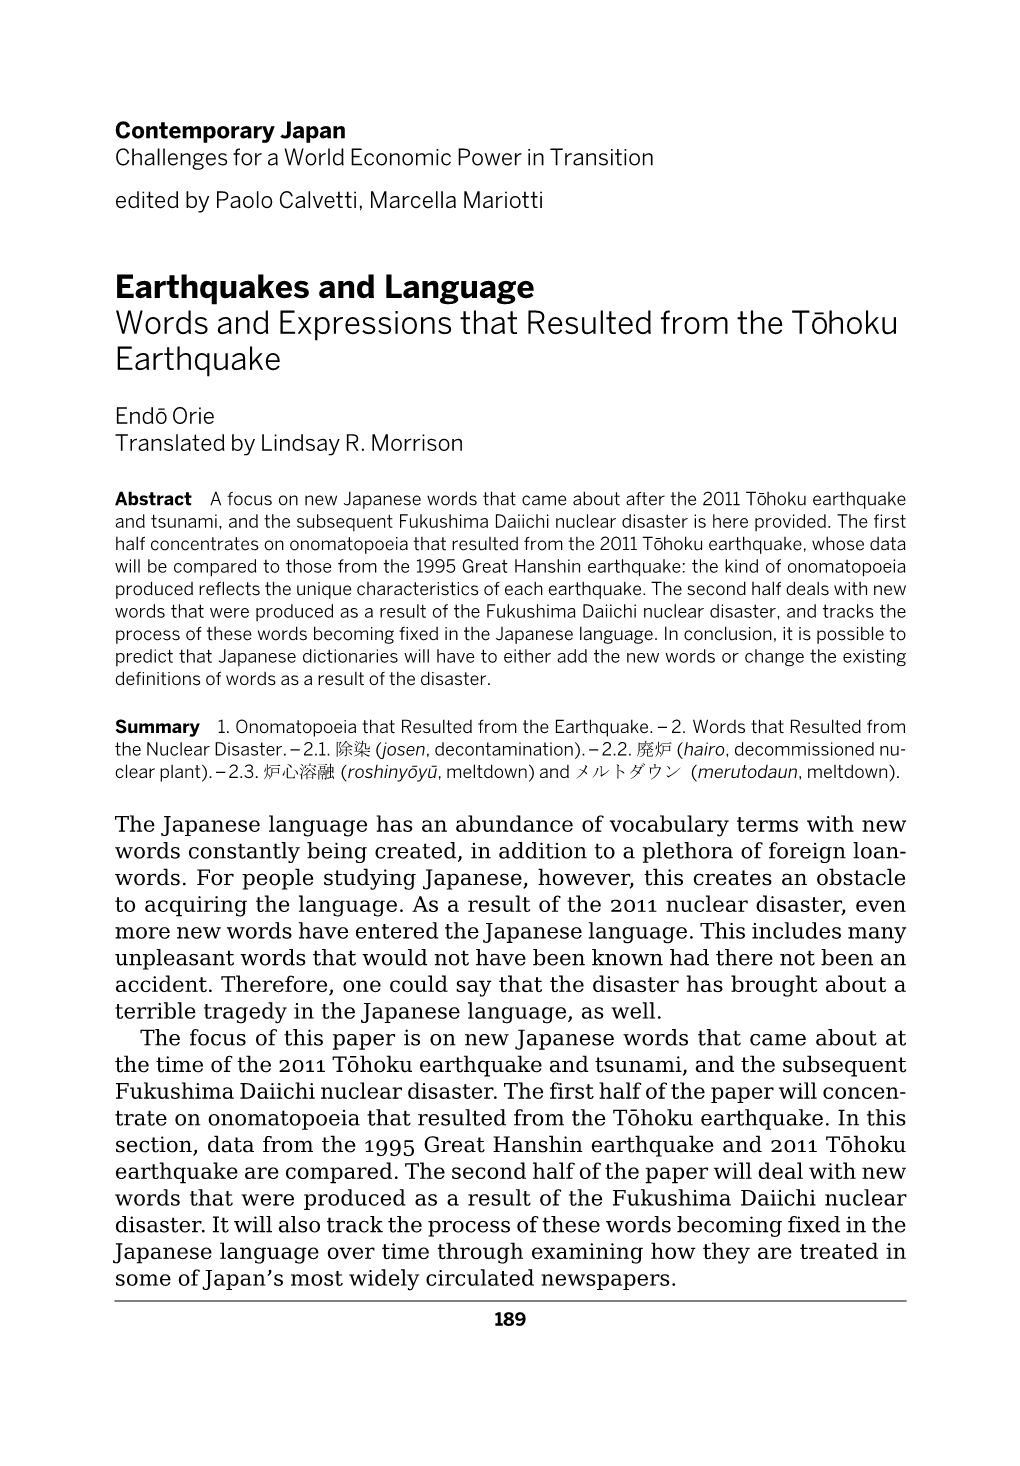 Earthquakes and Language Words and Expressions That Resulted from the To¯Hoku Earthquake